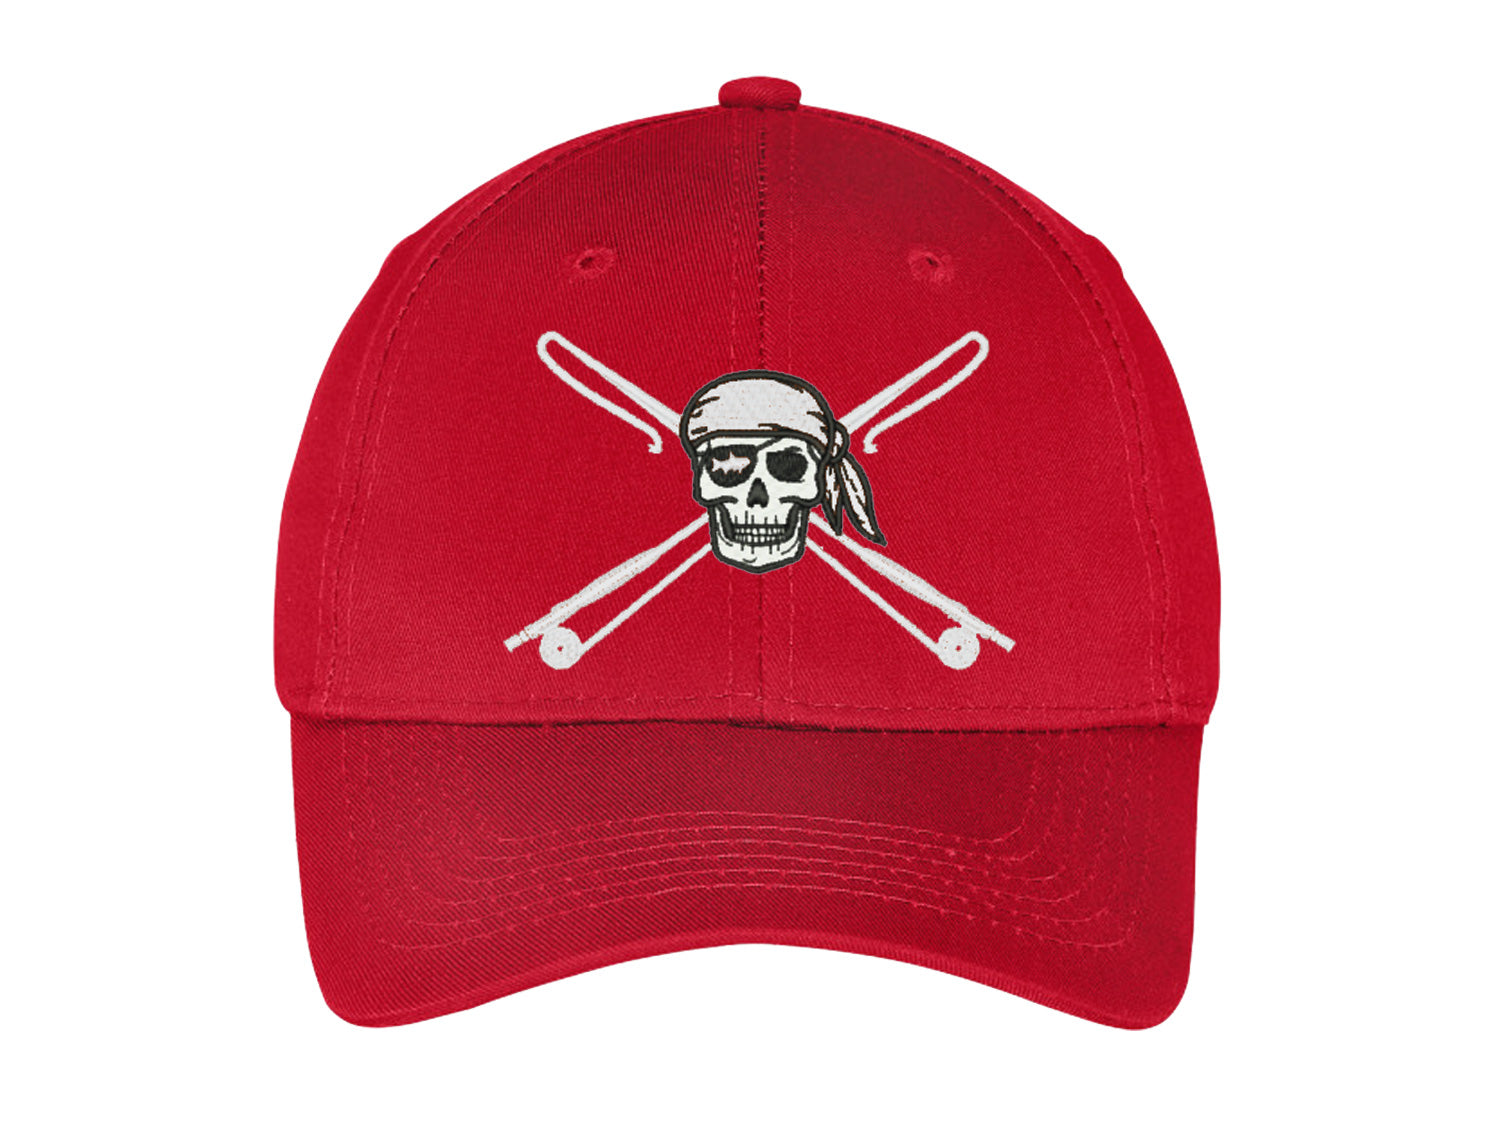 Youth Fishing Hats -Tarpon & Pirate Skull with Fishing Rods Logo -*10 Colors! Red / Adjustable/Youth